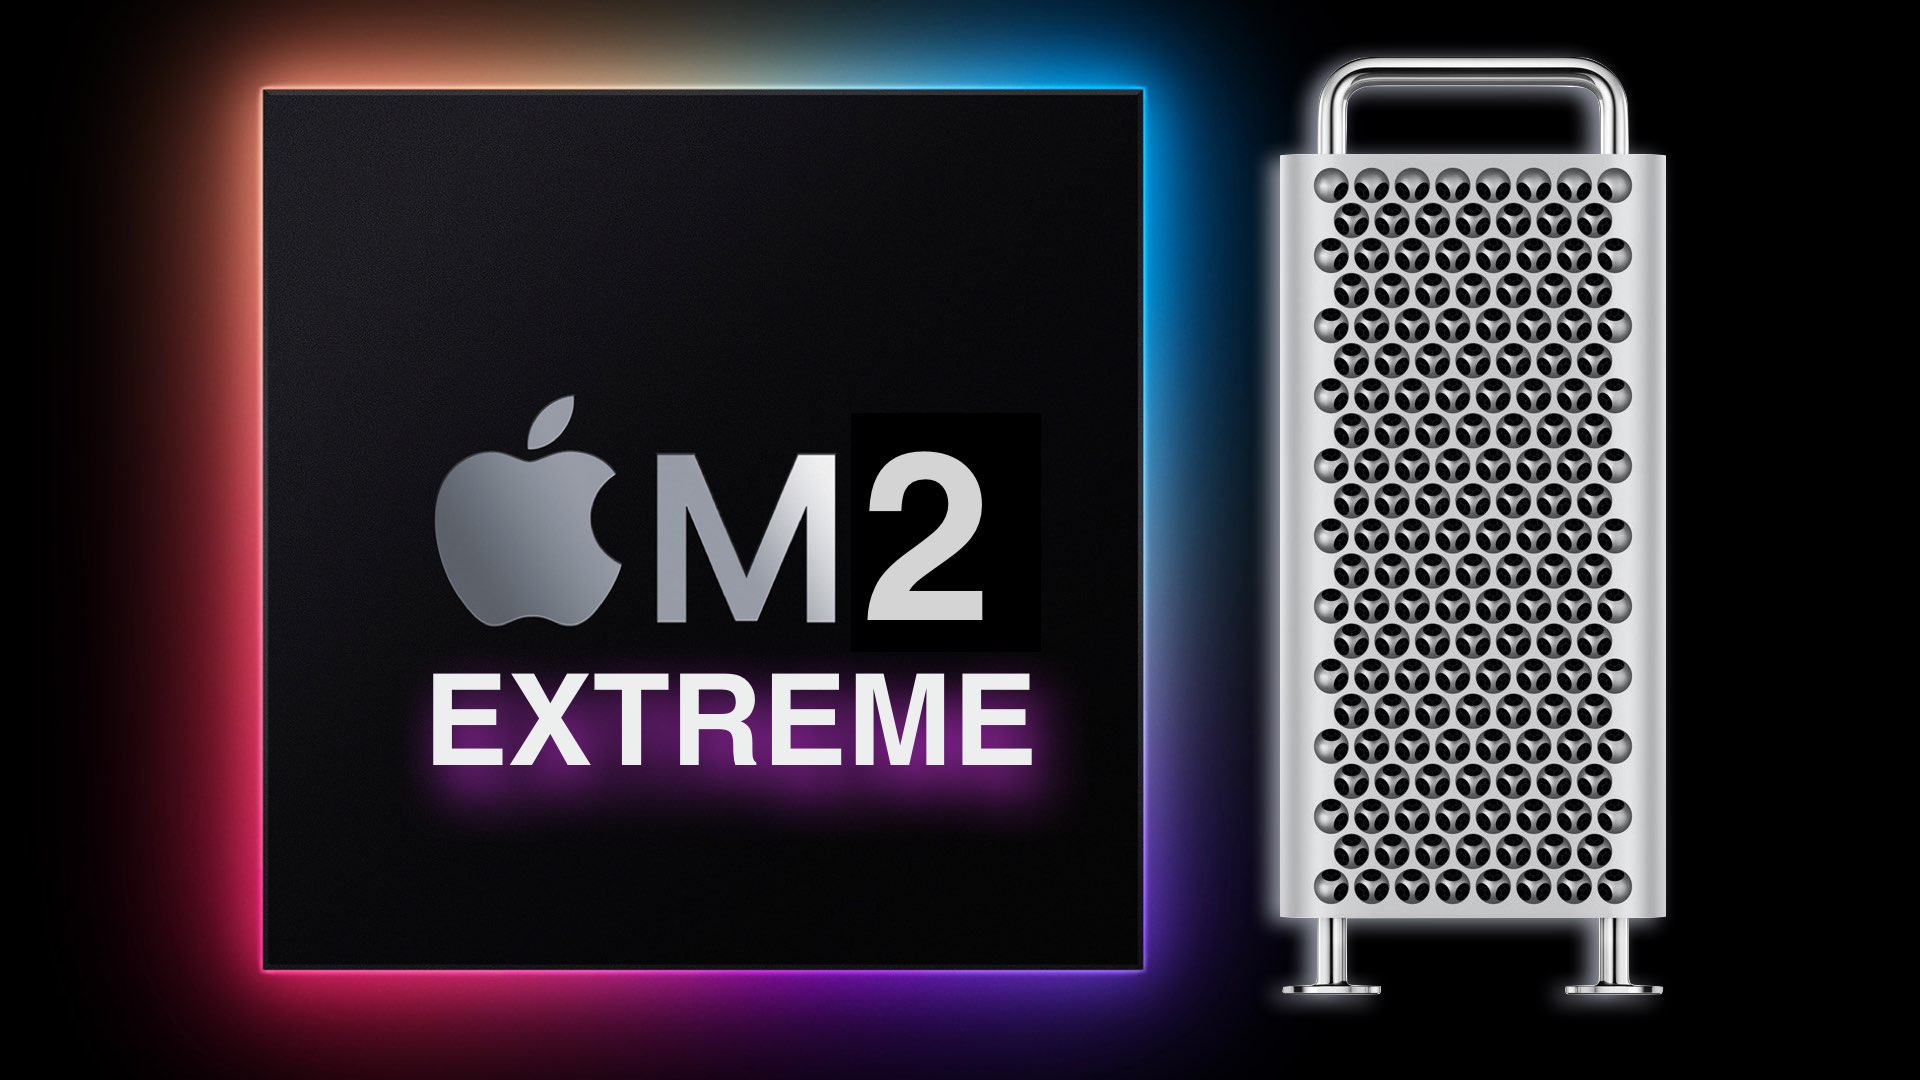 Gurman: The Next Mac Pro Will be Armed With ‘M2 EXTREME’ Chip